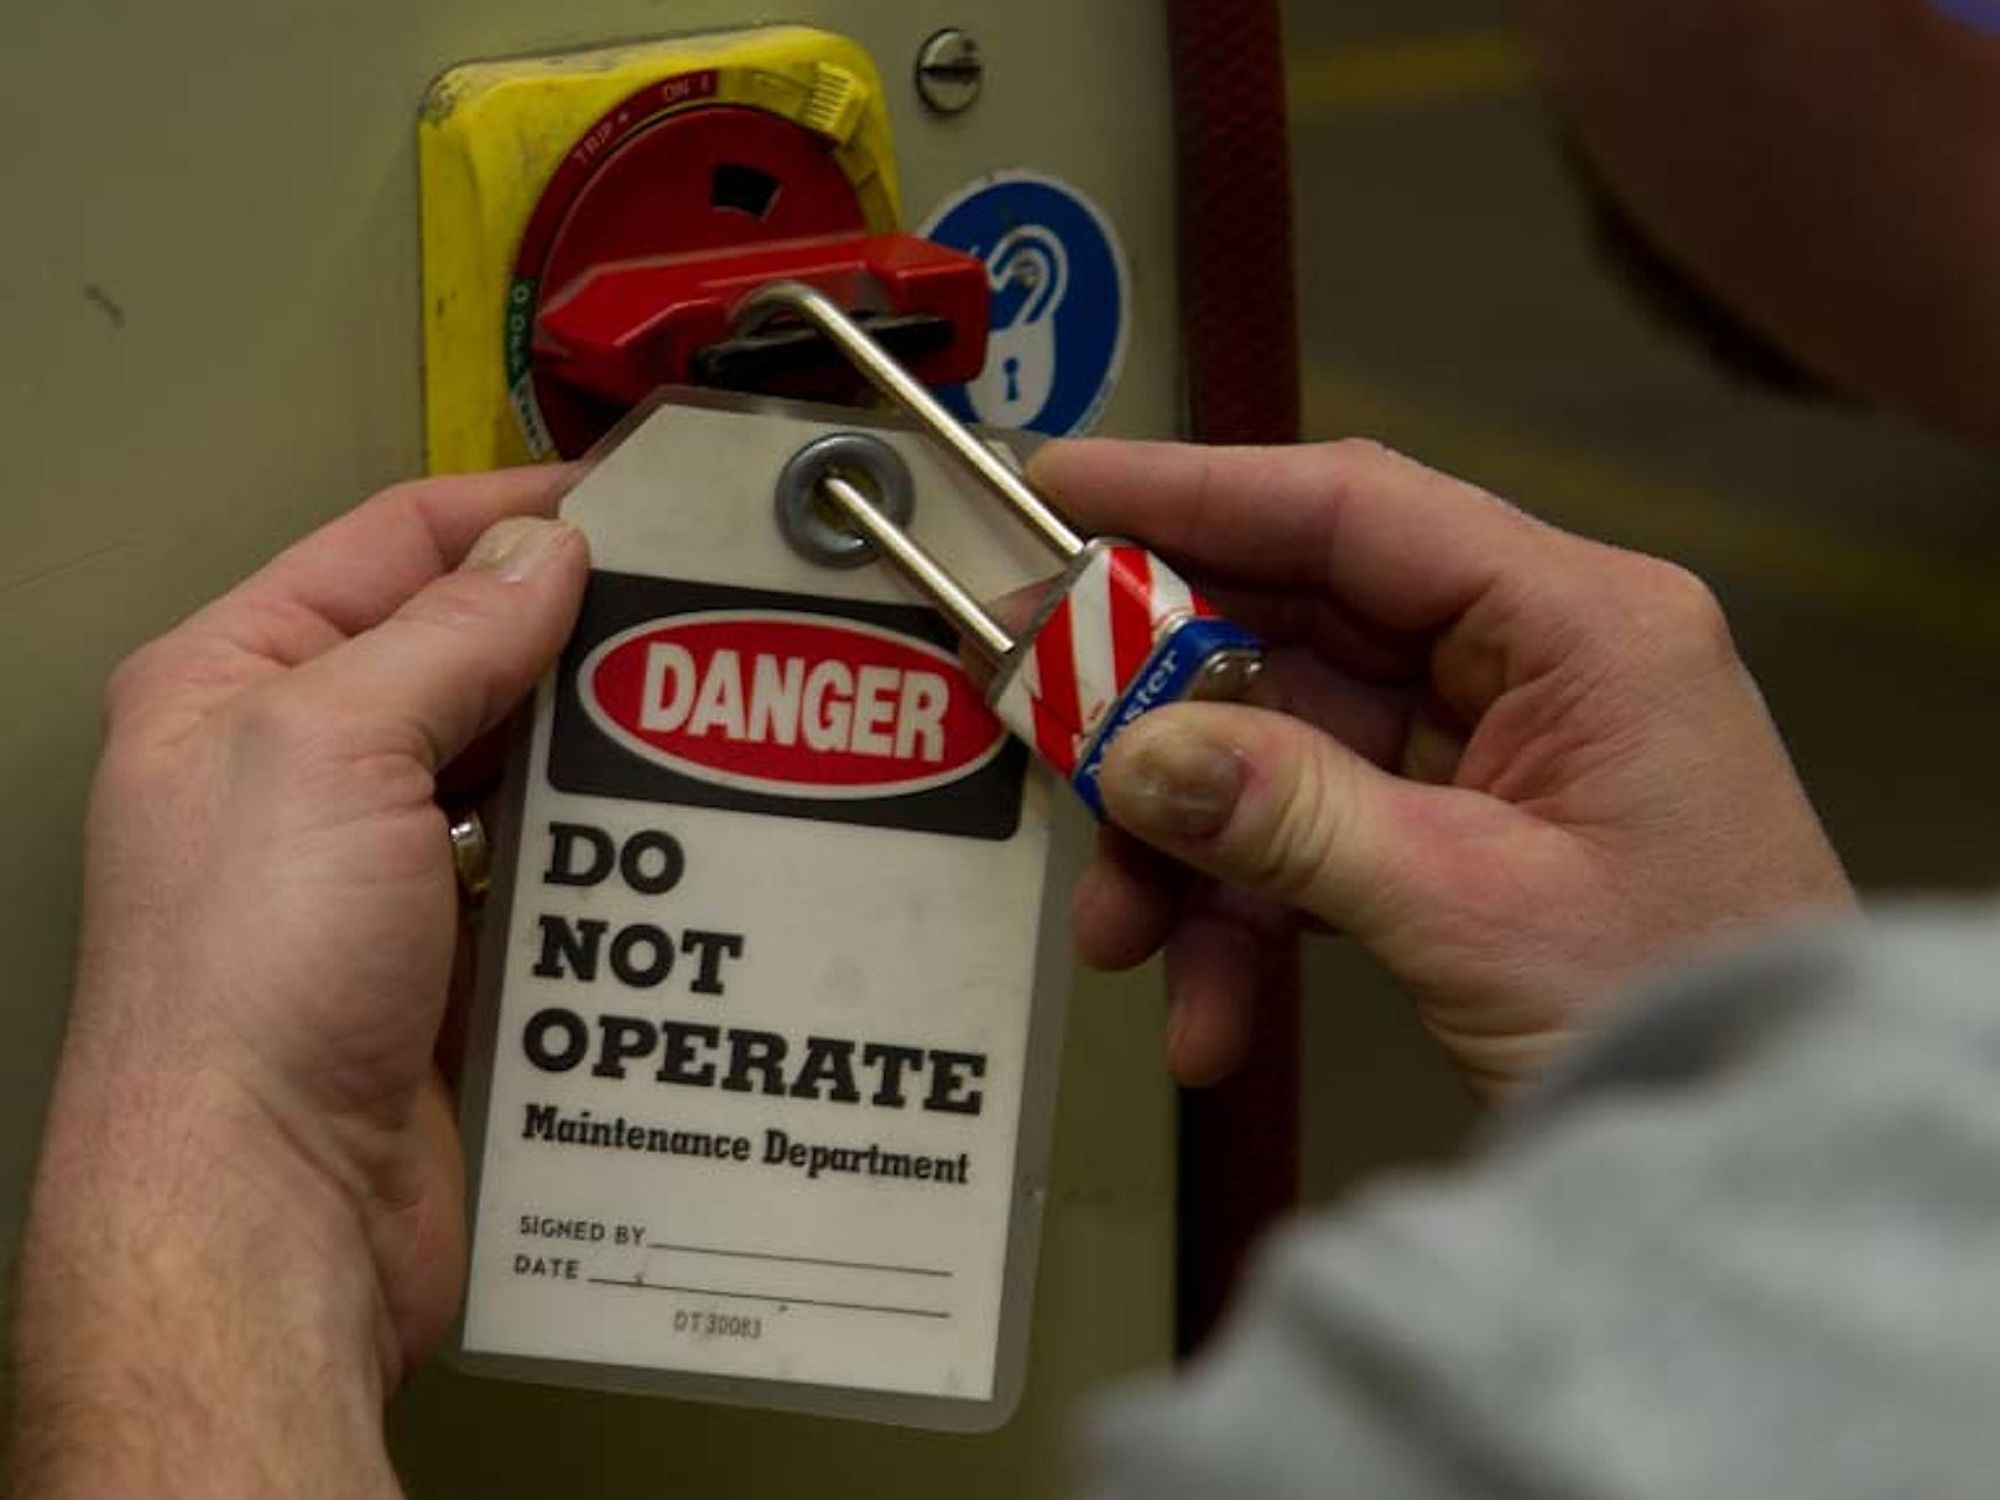 Using tagout devices instead of lockout devices